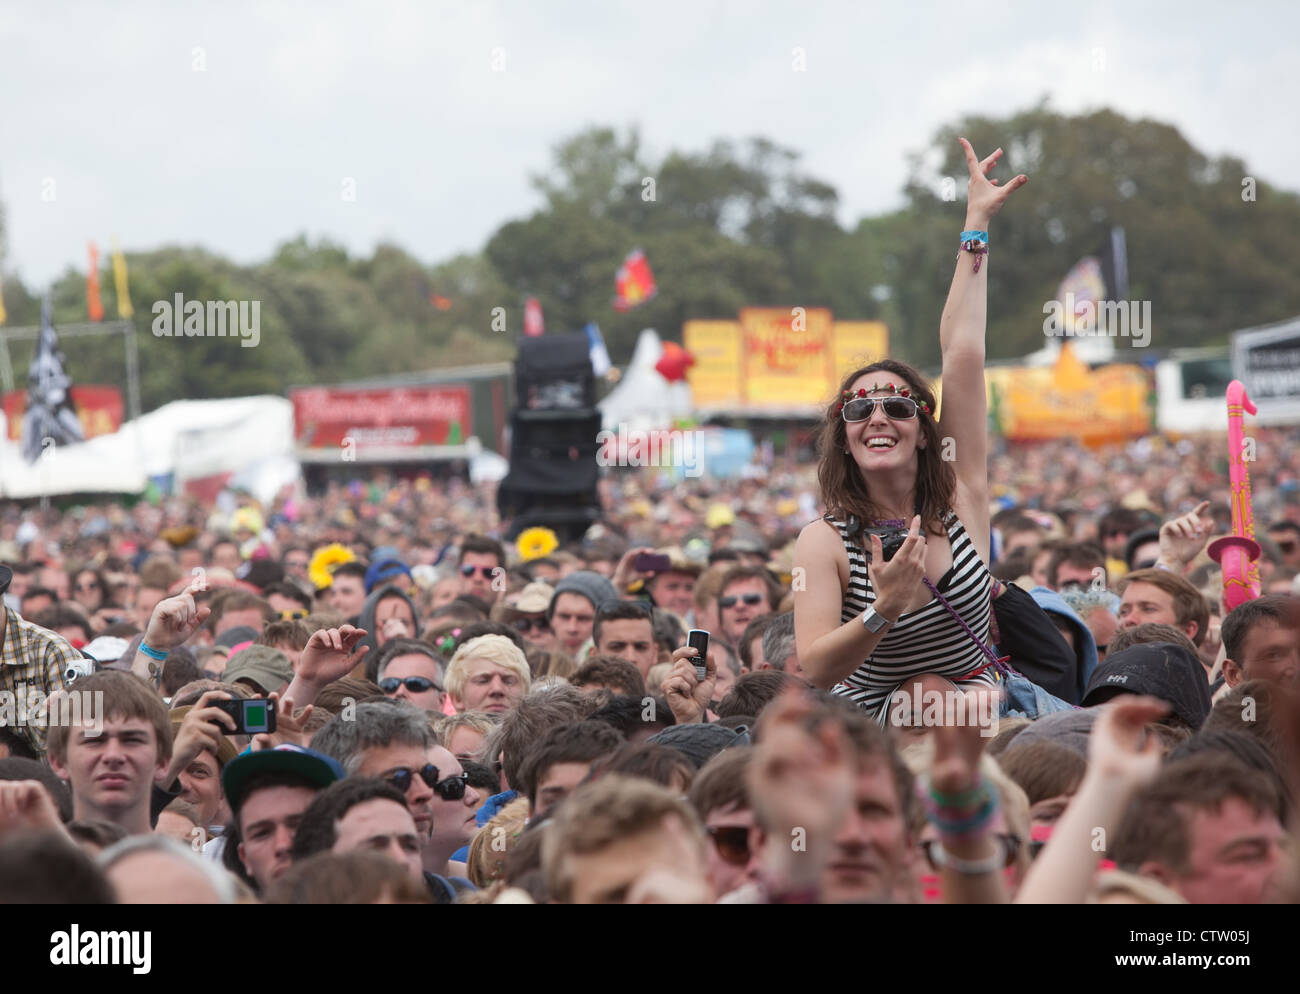 Crowd at a Music Festival Stock Photo